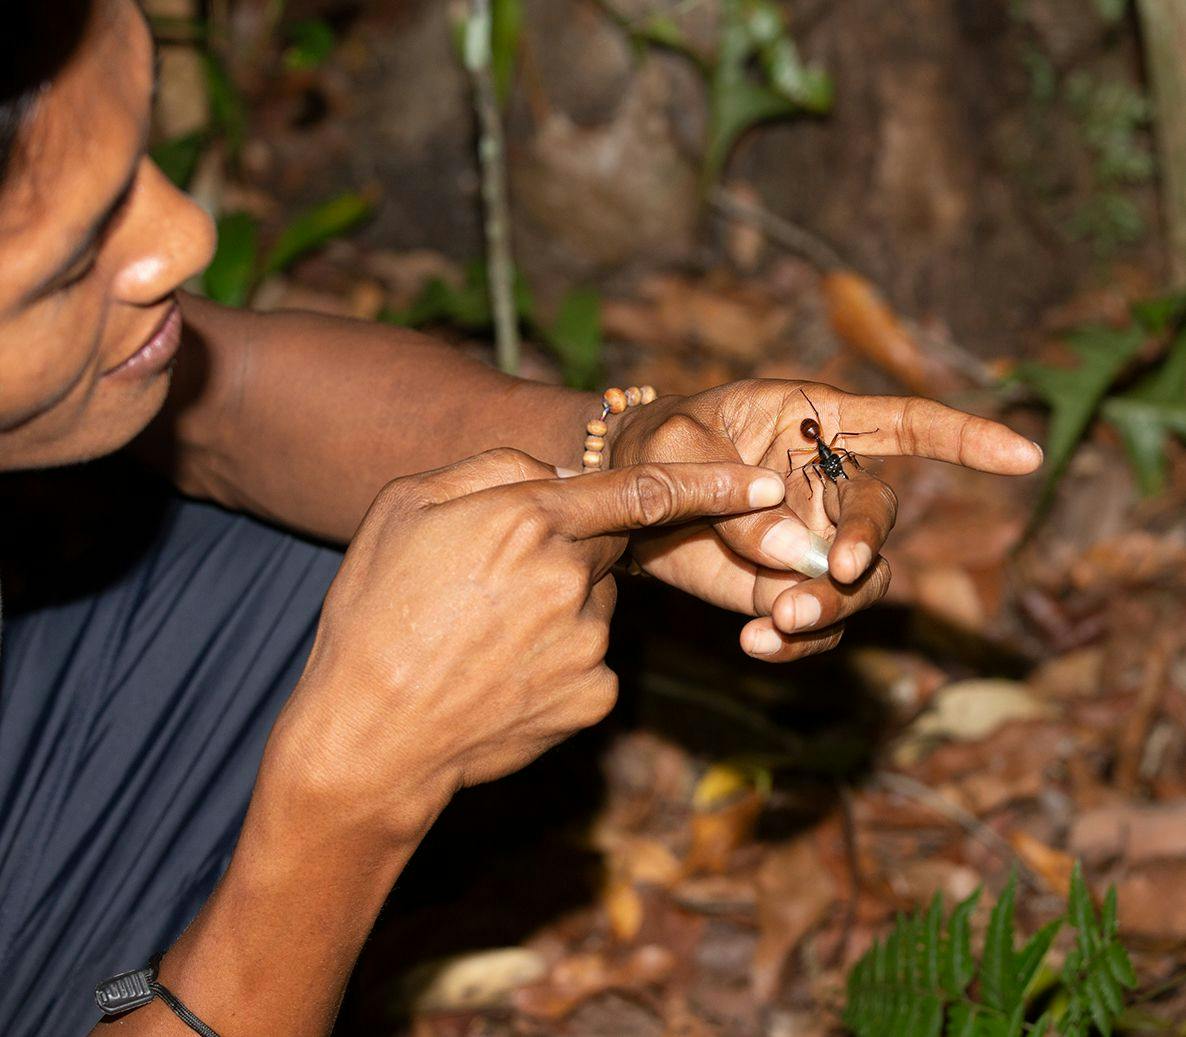 The large ants would climb on our hands as we lowered our hands to the rainforest floor.